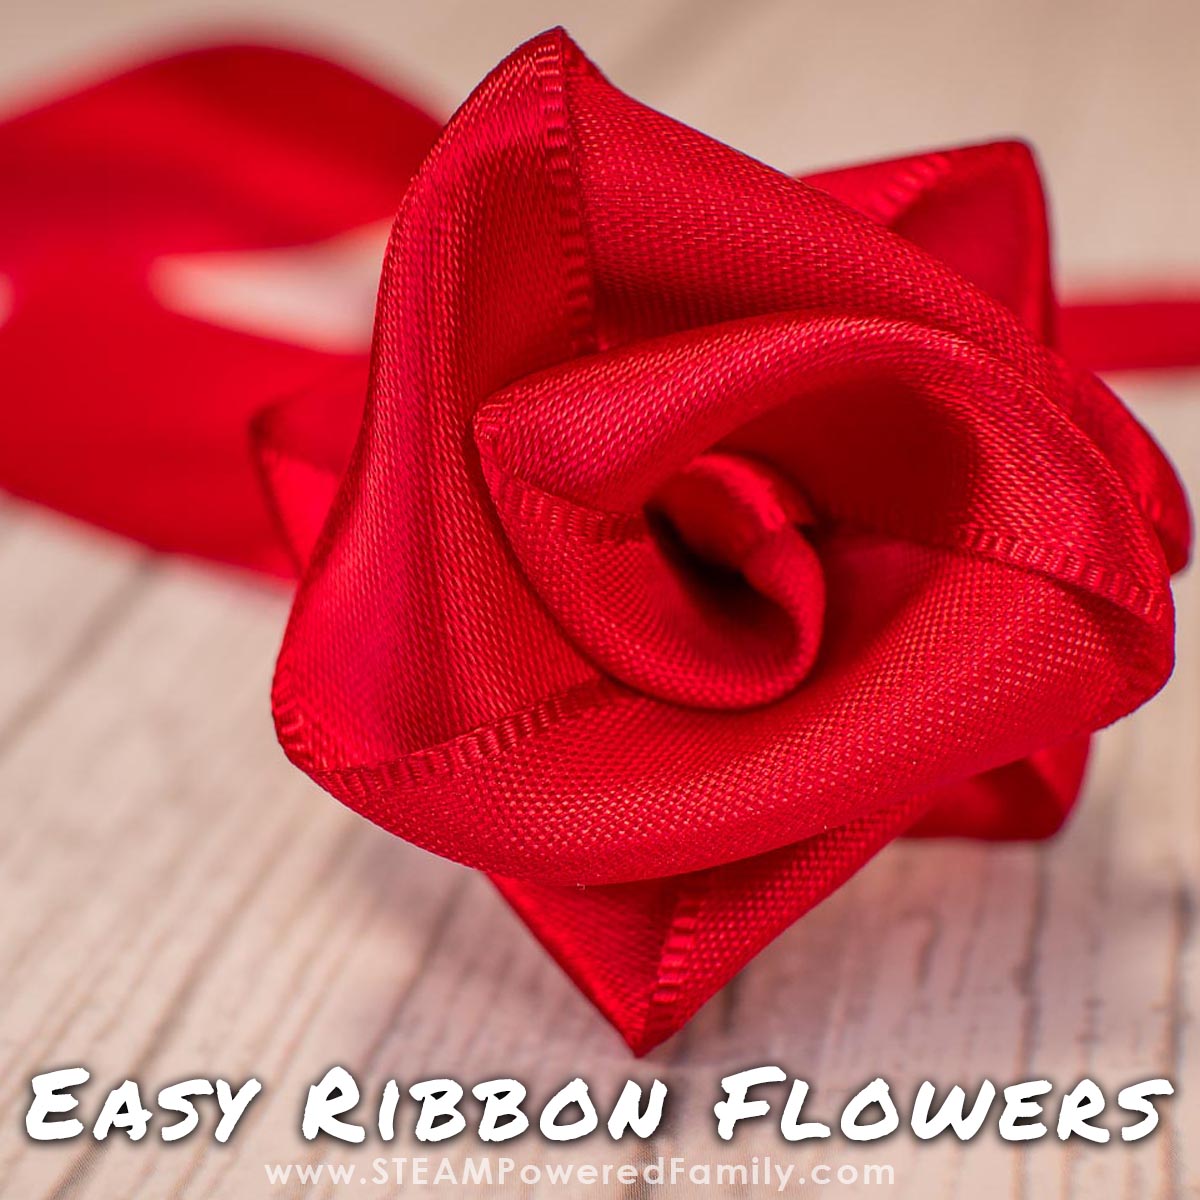 How To Make Ribbon Flowers - A Step By Step Tutorial